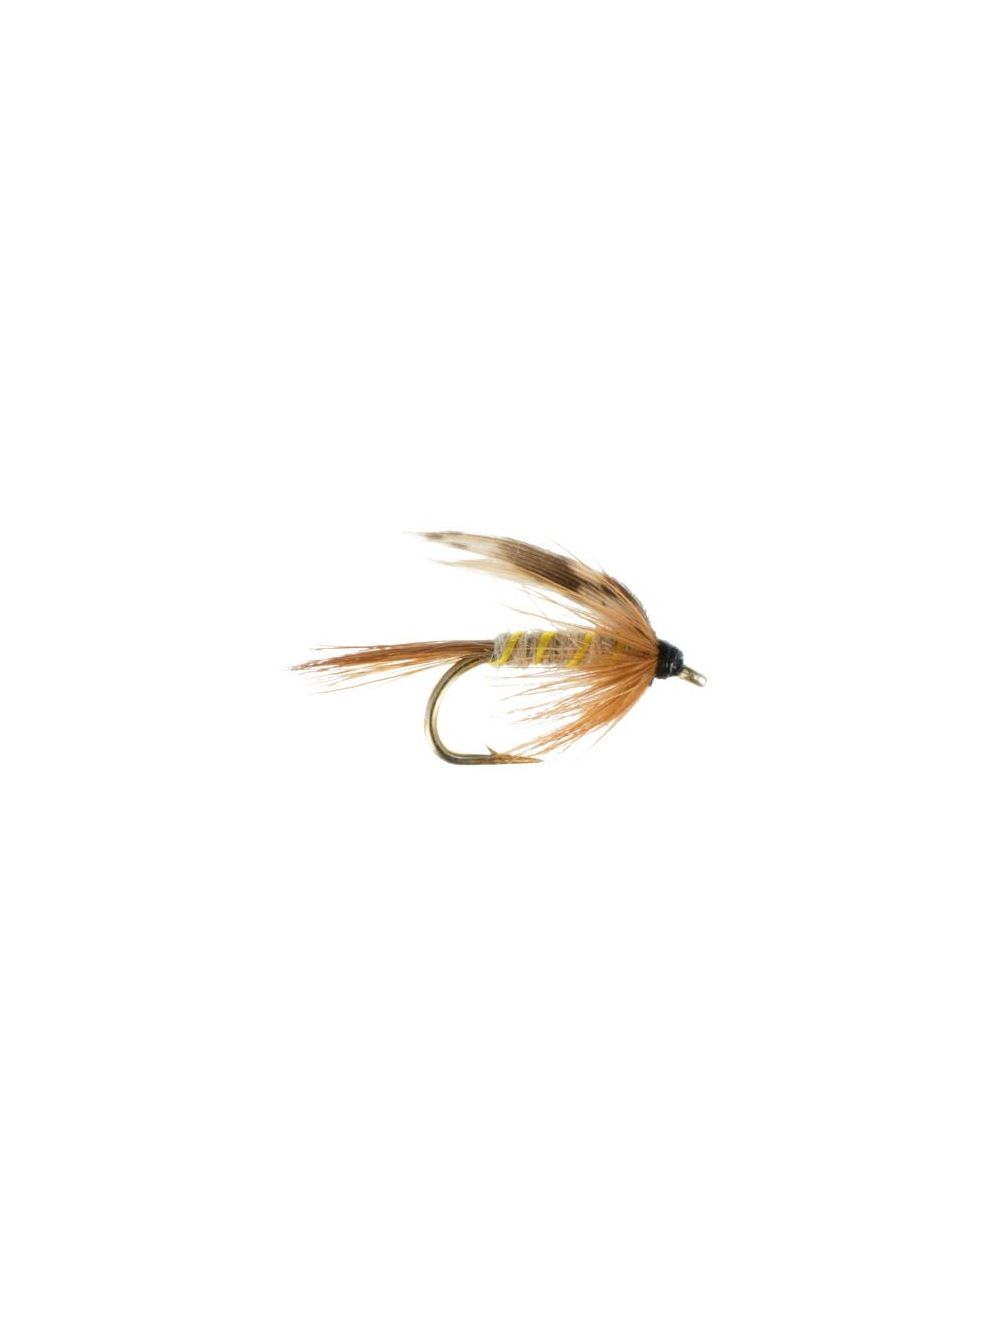 March Brown Fly Fishing Flies